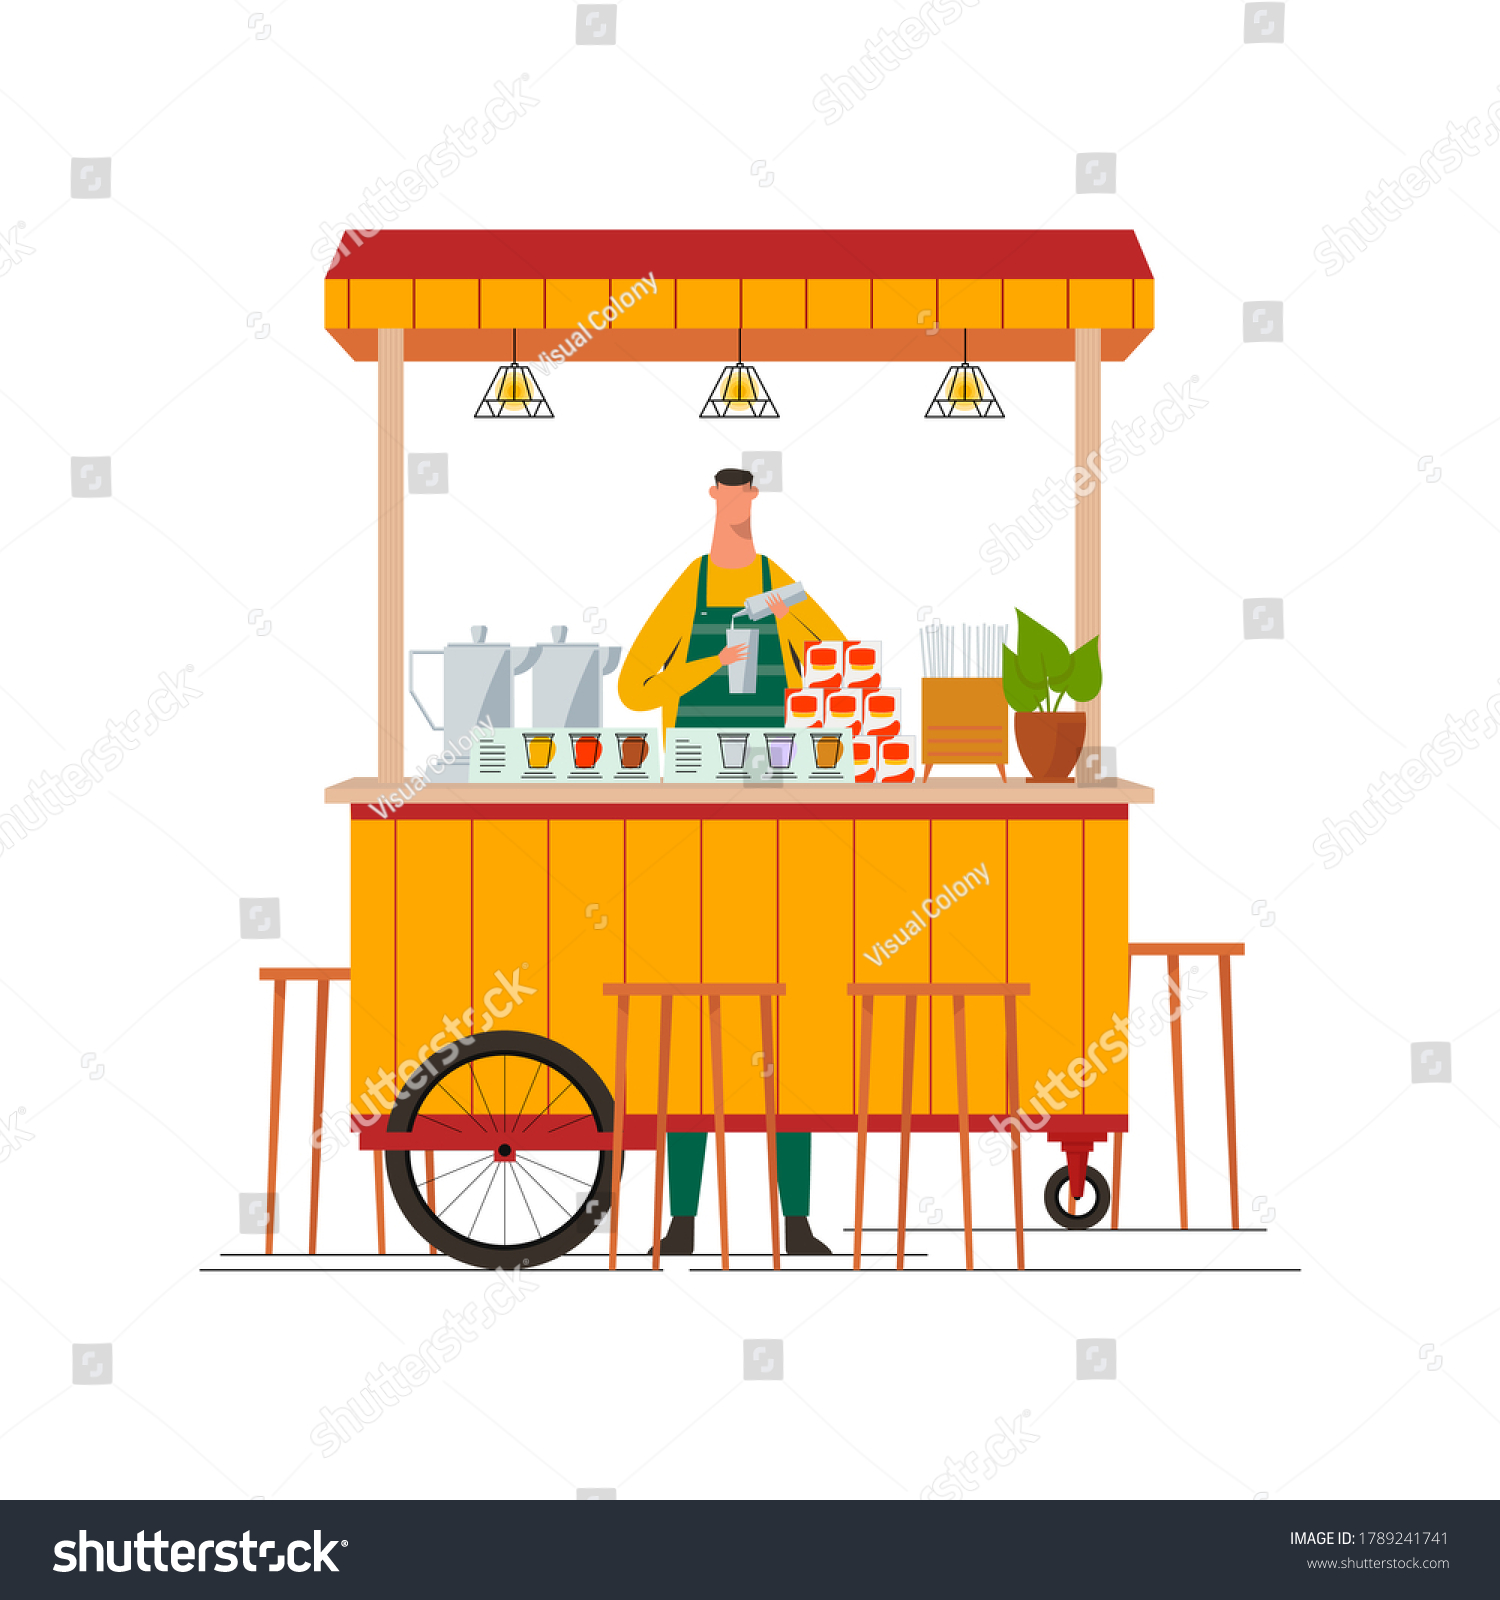 SVG of Young Man Standing at Market Stall, Small Business, Drink Cart, Street Food svg